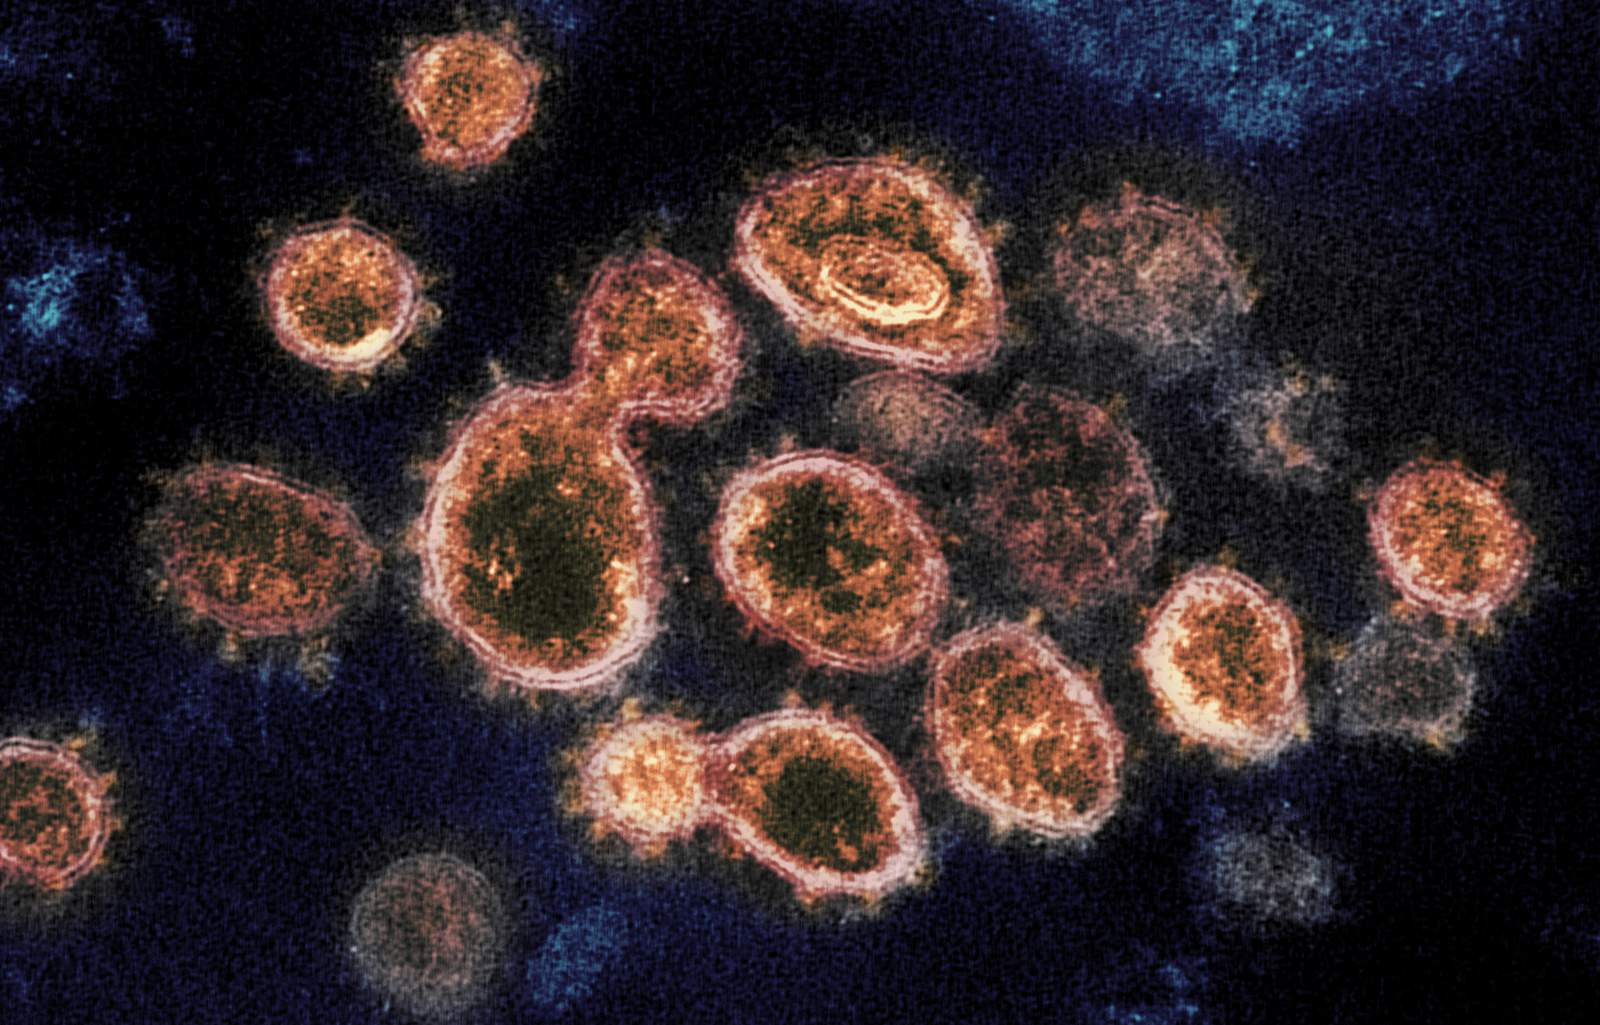 Florida reports first case of coronavirus with most infectious British strain